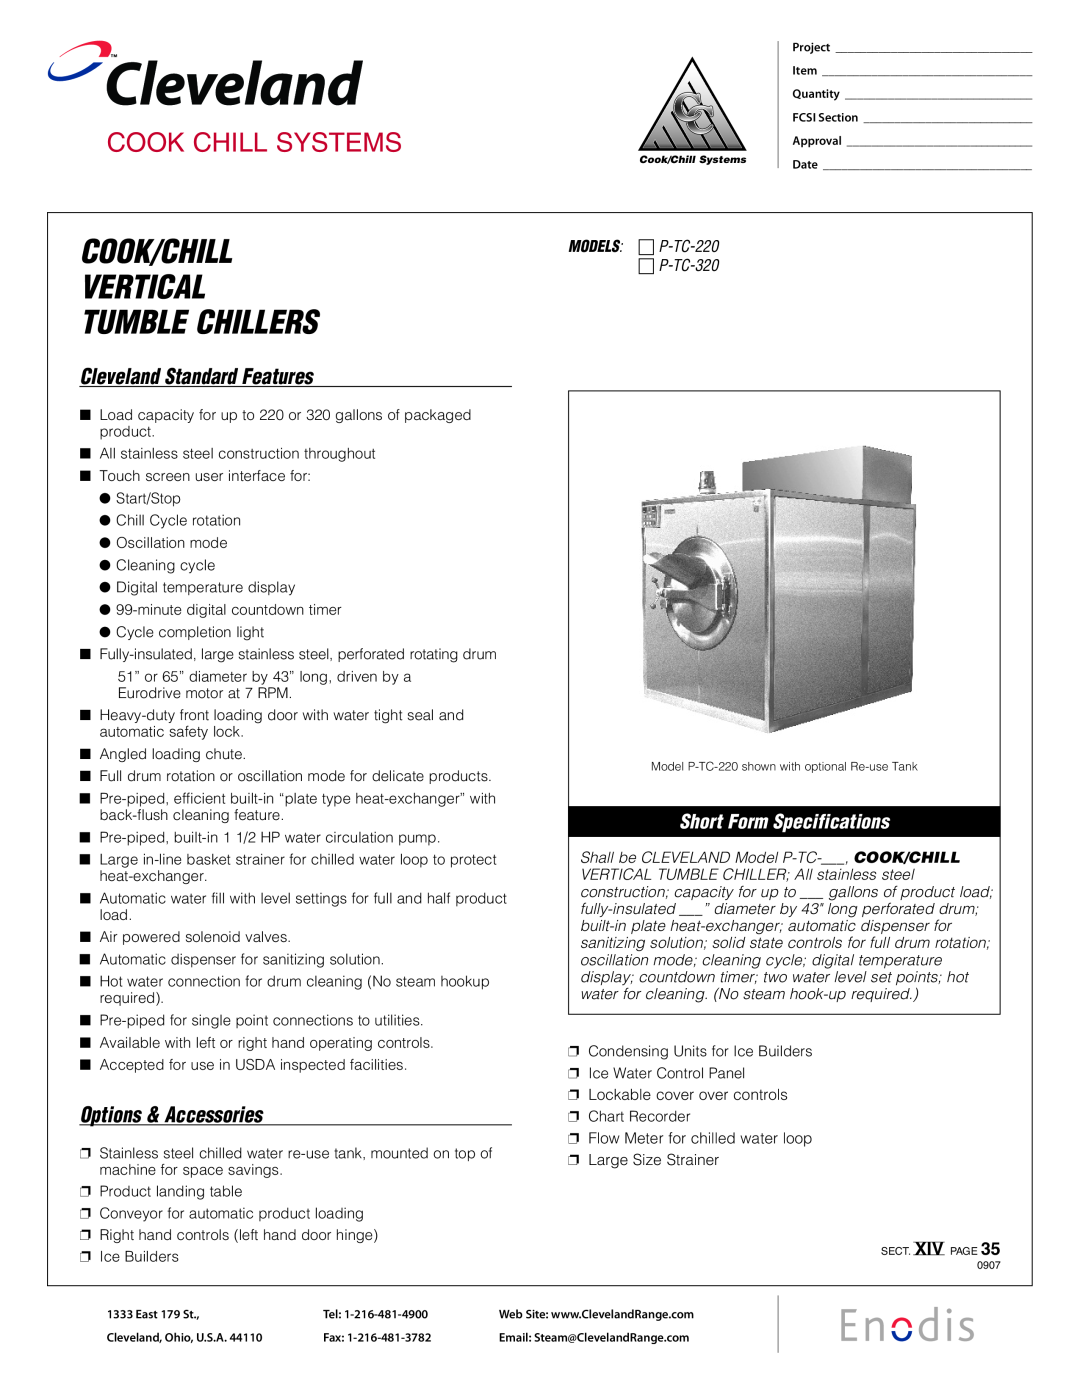 Cleveland Range P-TC-220, P-TC-320 specifications Cleveland, Cook/Chill Vertical Tumble Chillers, Cook Chill Systems 